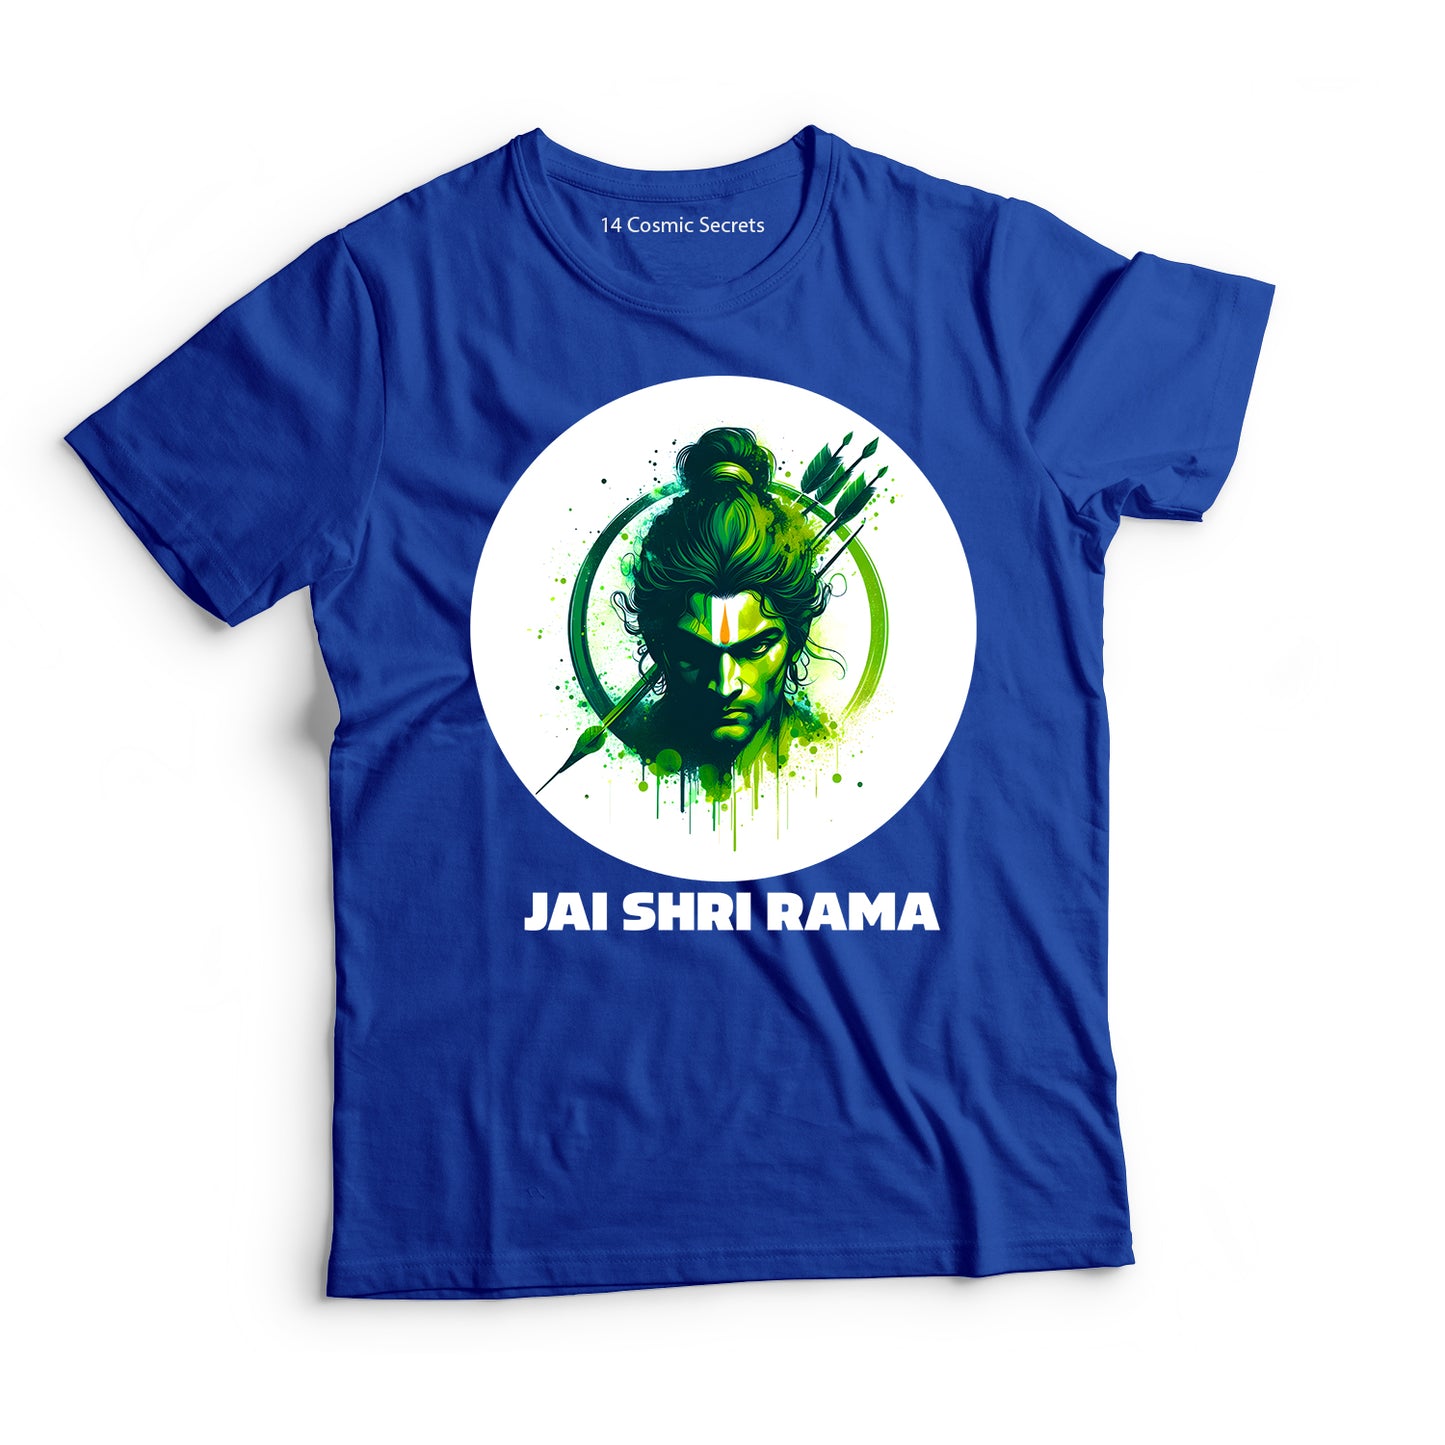 Rama the Conqueror: Demon Slayer Graphic Printed T-Shirt for Men Cotton T-Shirt Original Super Heroes of India T-Shirt